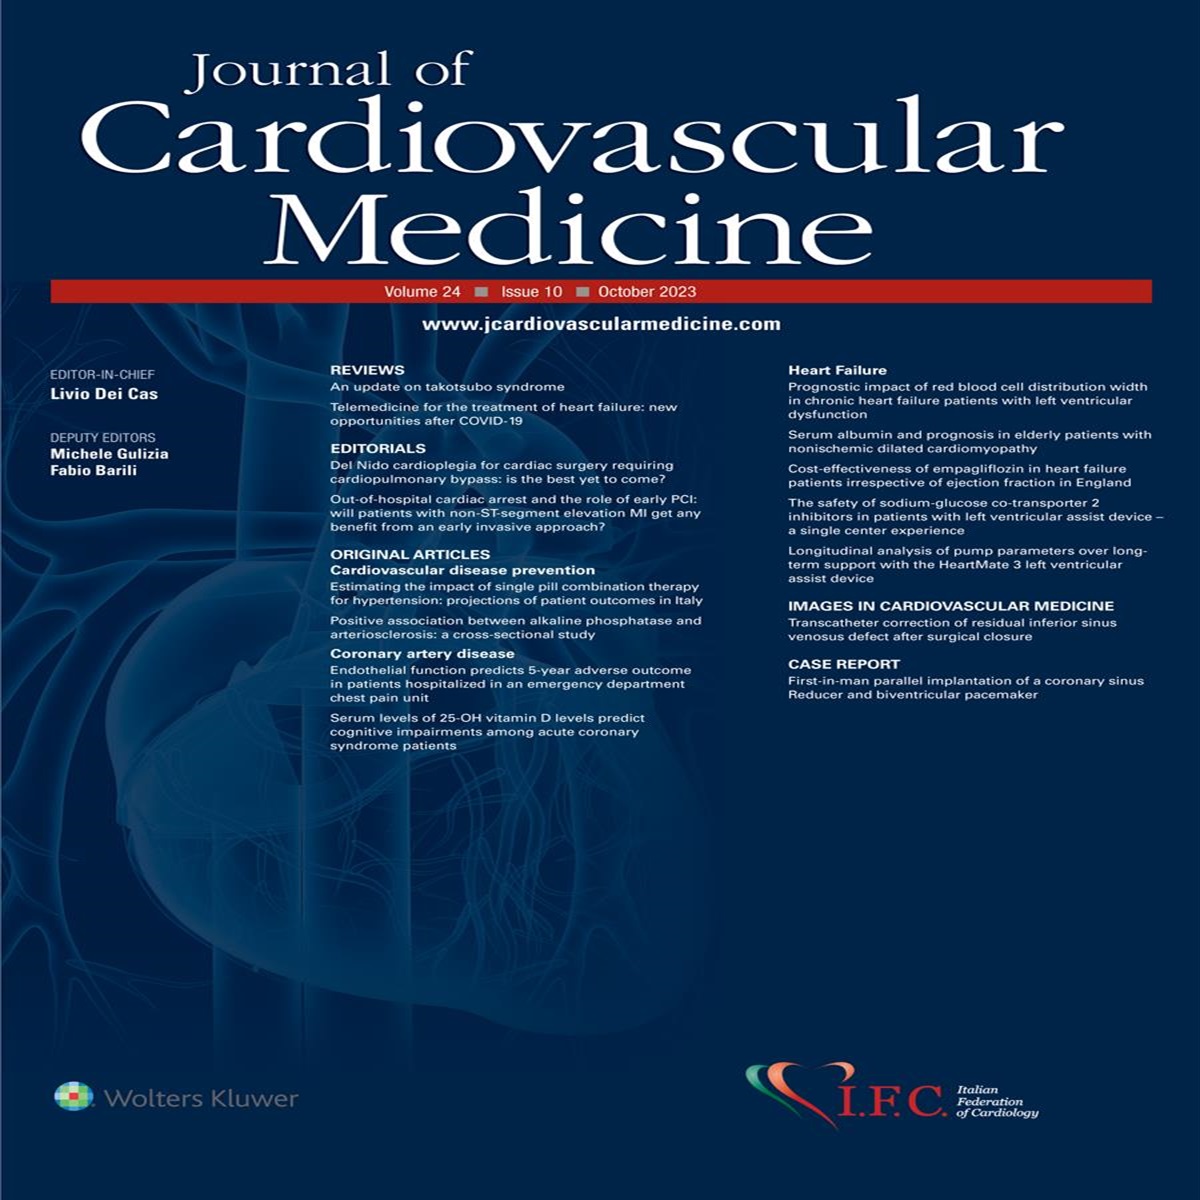 Out-of-hospital cardiac arrest and the role of early PCI: will patients with non-ST-segment elevation MI get any benefit from an early invasive approach?